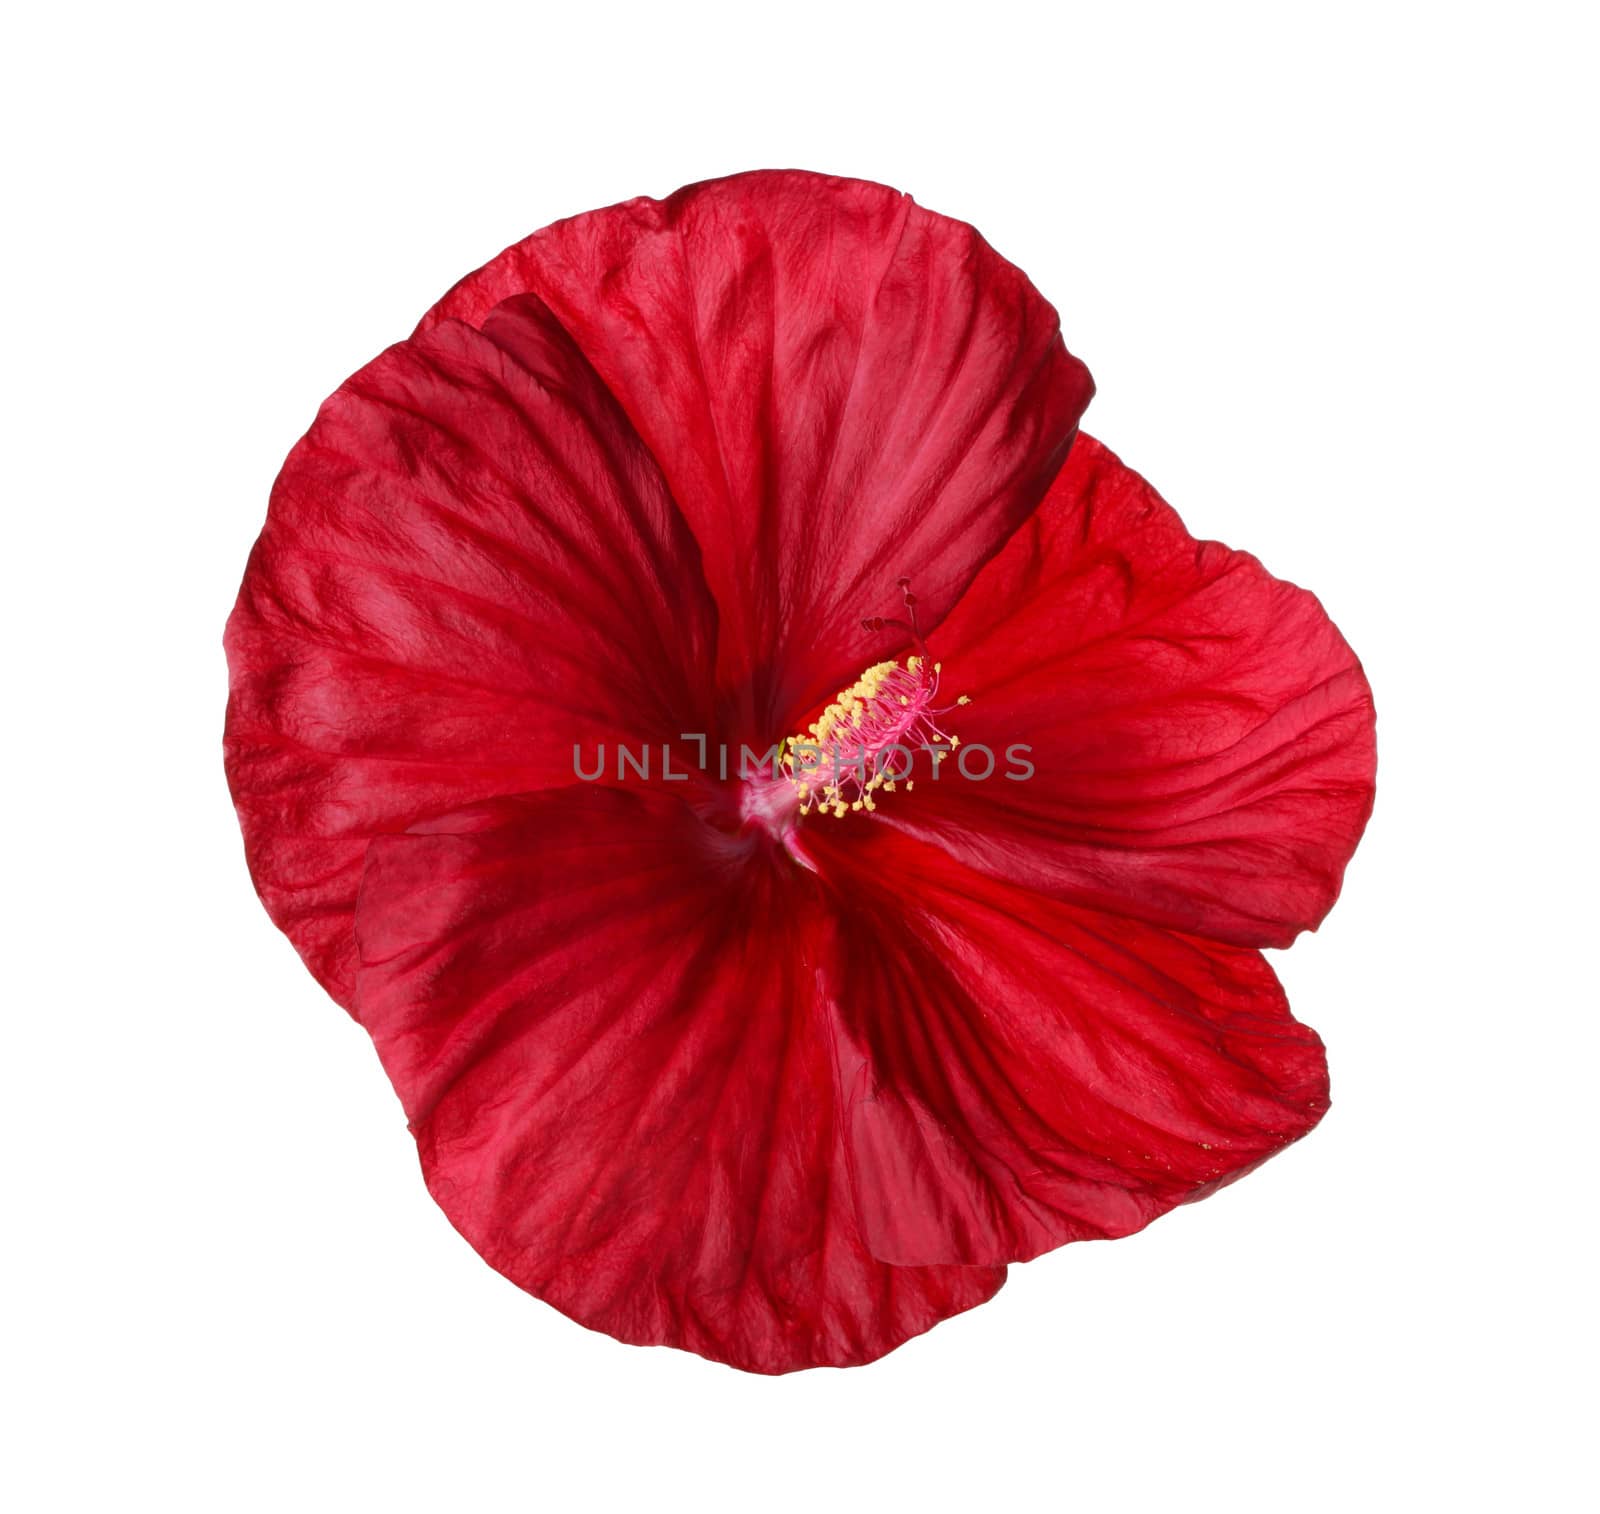 Single flower of a deep red hibiscus (Hibiscus moscheutos hybrid, swamp-rose mallow or rose mallow) isolated against a white background